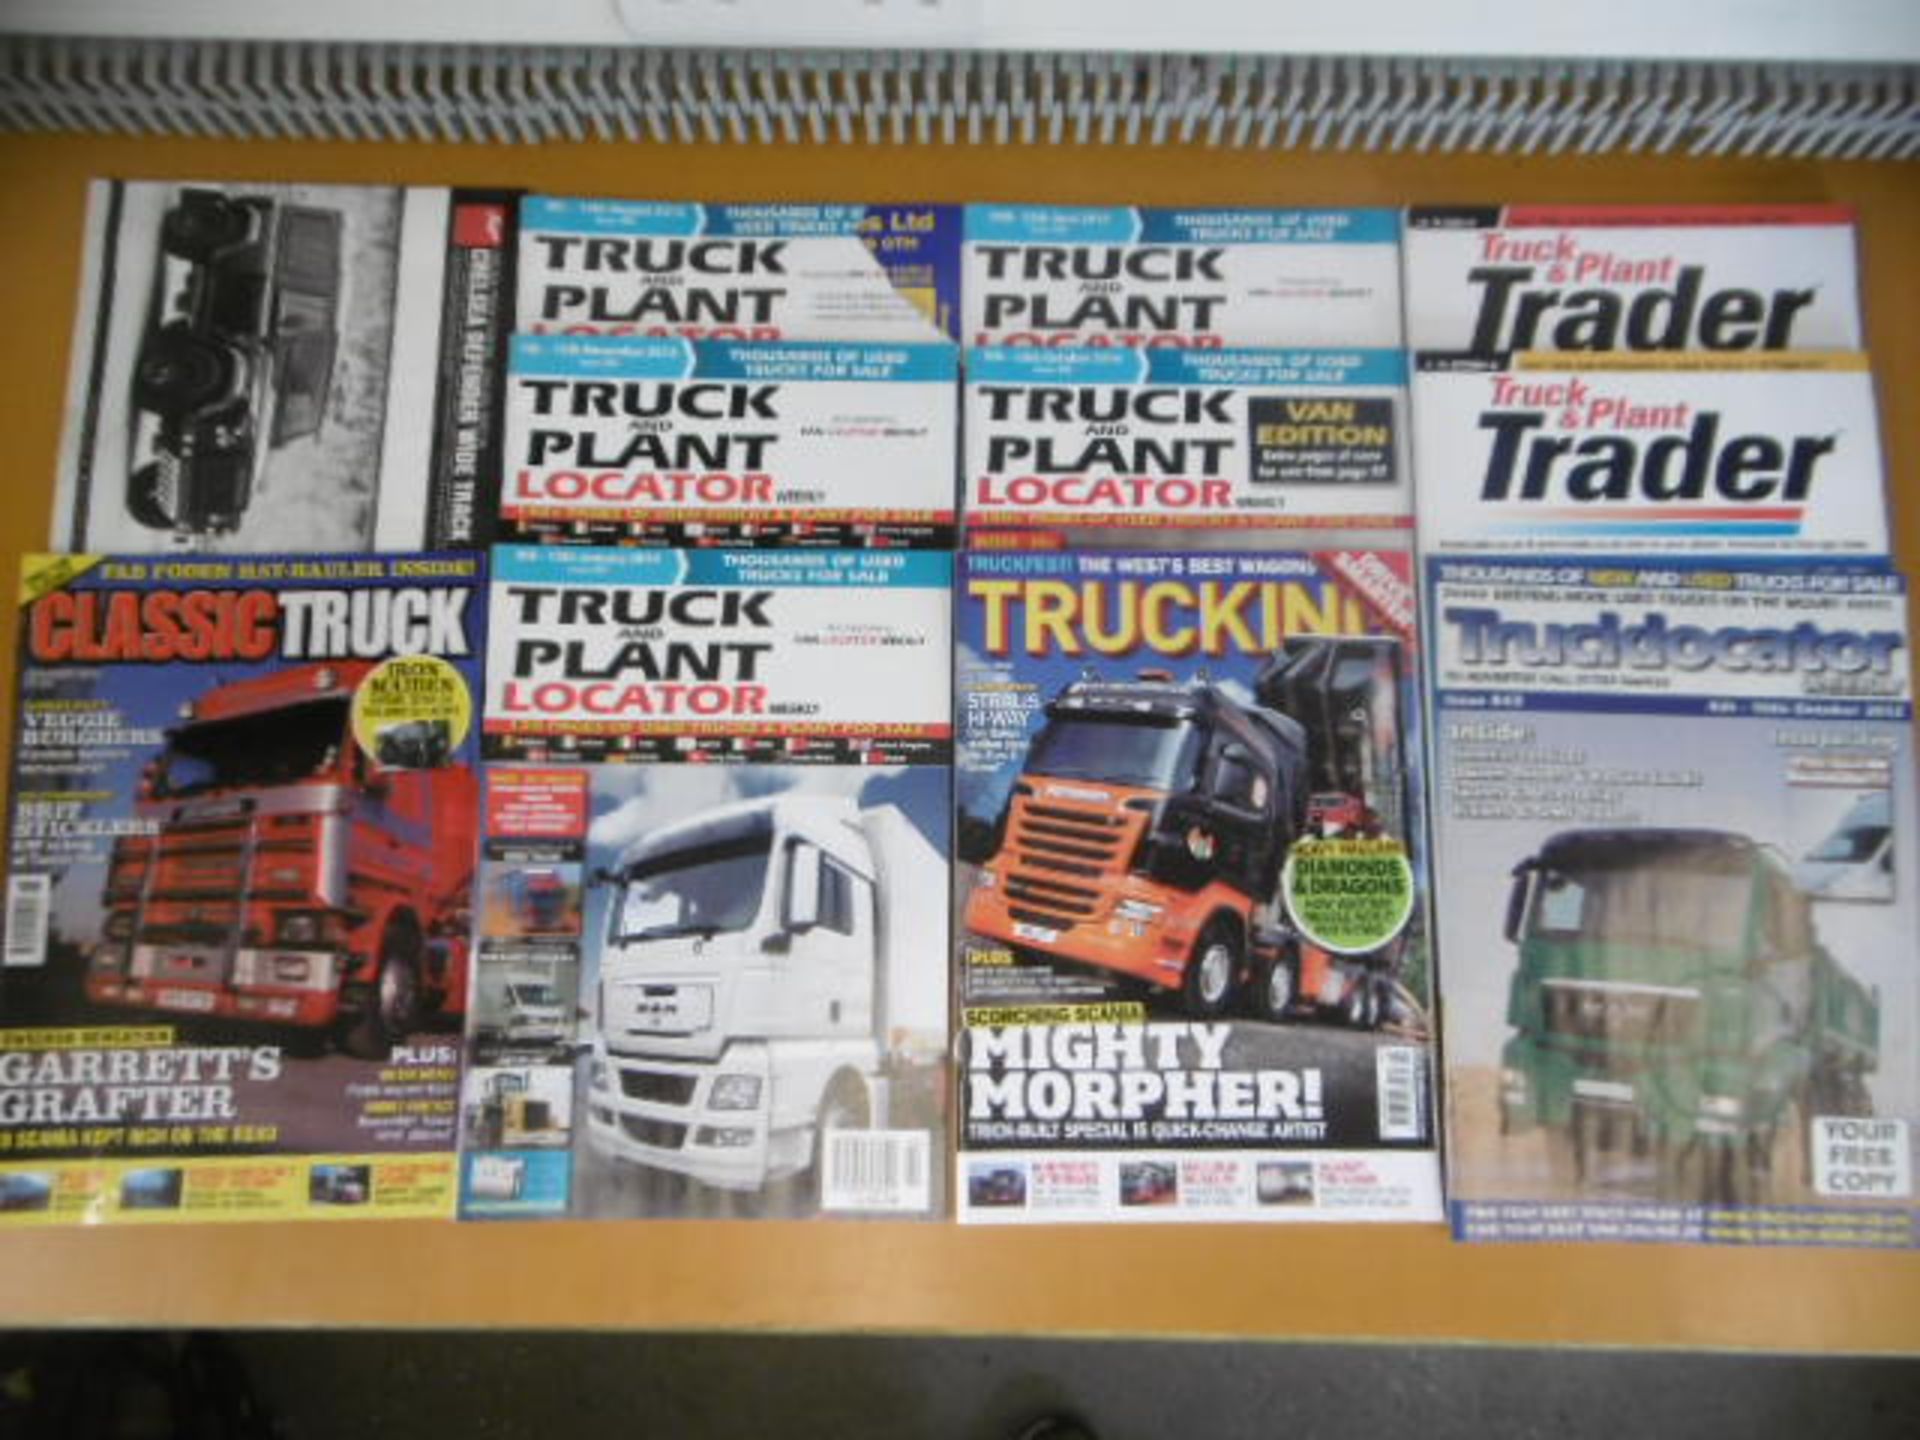 Mixed Land Rover, 4x4 and Truck Magazines - Image 5 of 7